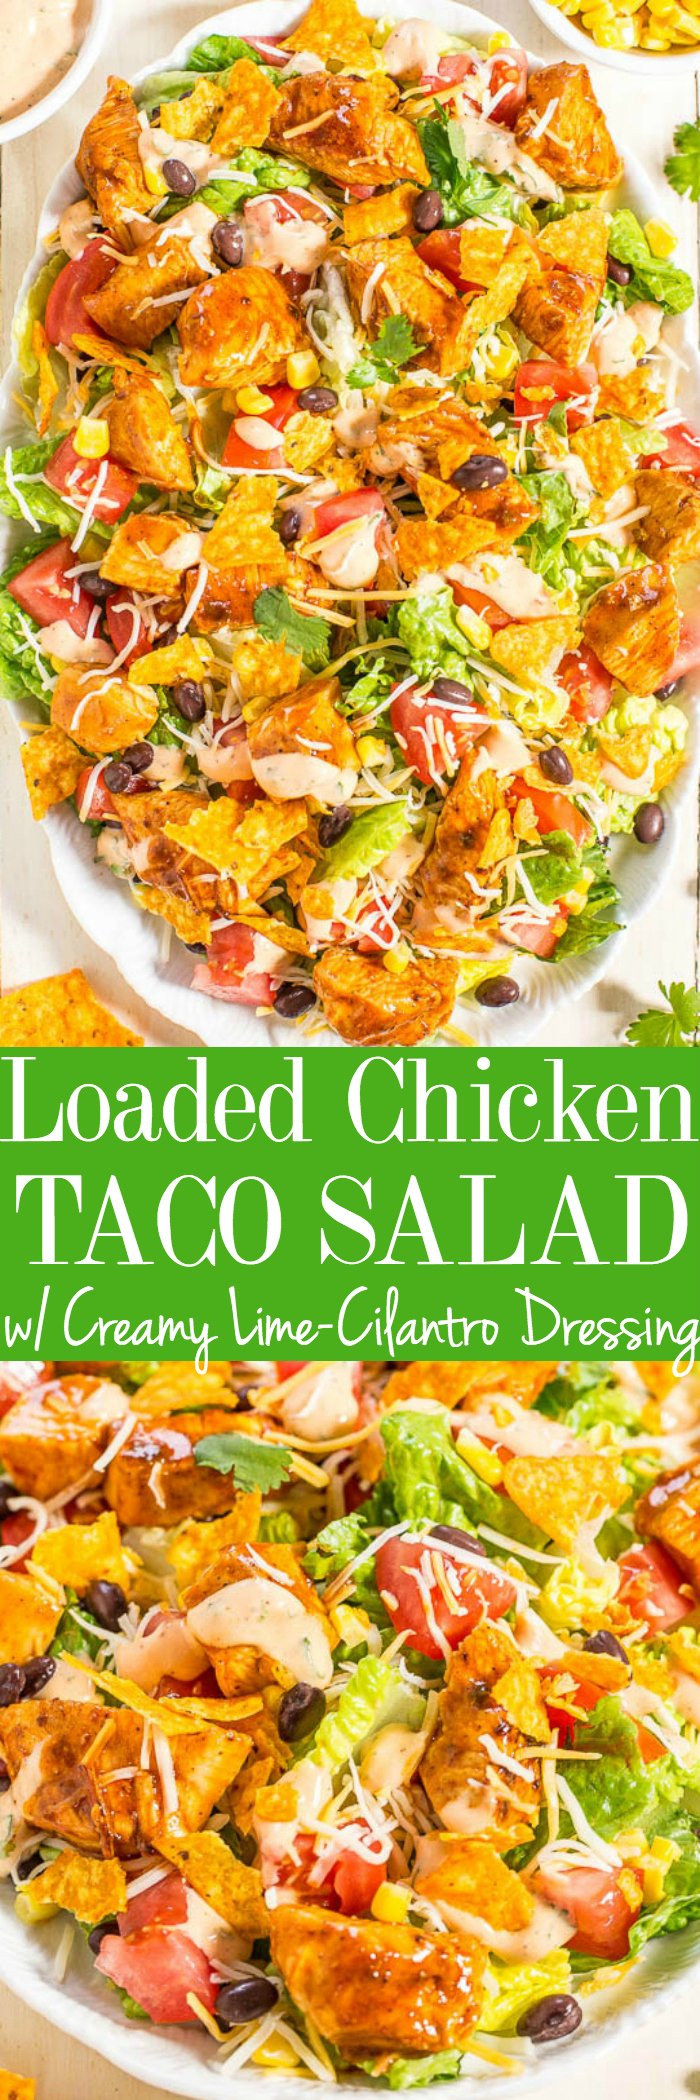 Loaded Chicken Taco Salad with Creamy Lime-Cilantro Dressing - Fast, easy, fresh and healthy!! All your favorite taco flavors in one big kickin' salad that everyone will love!! 